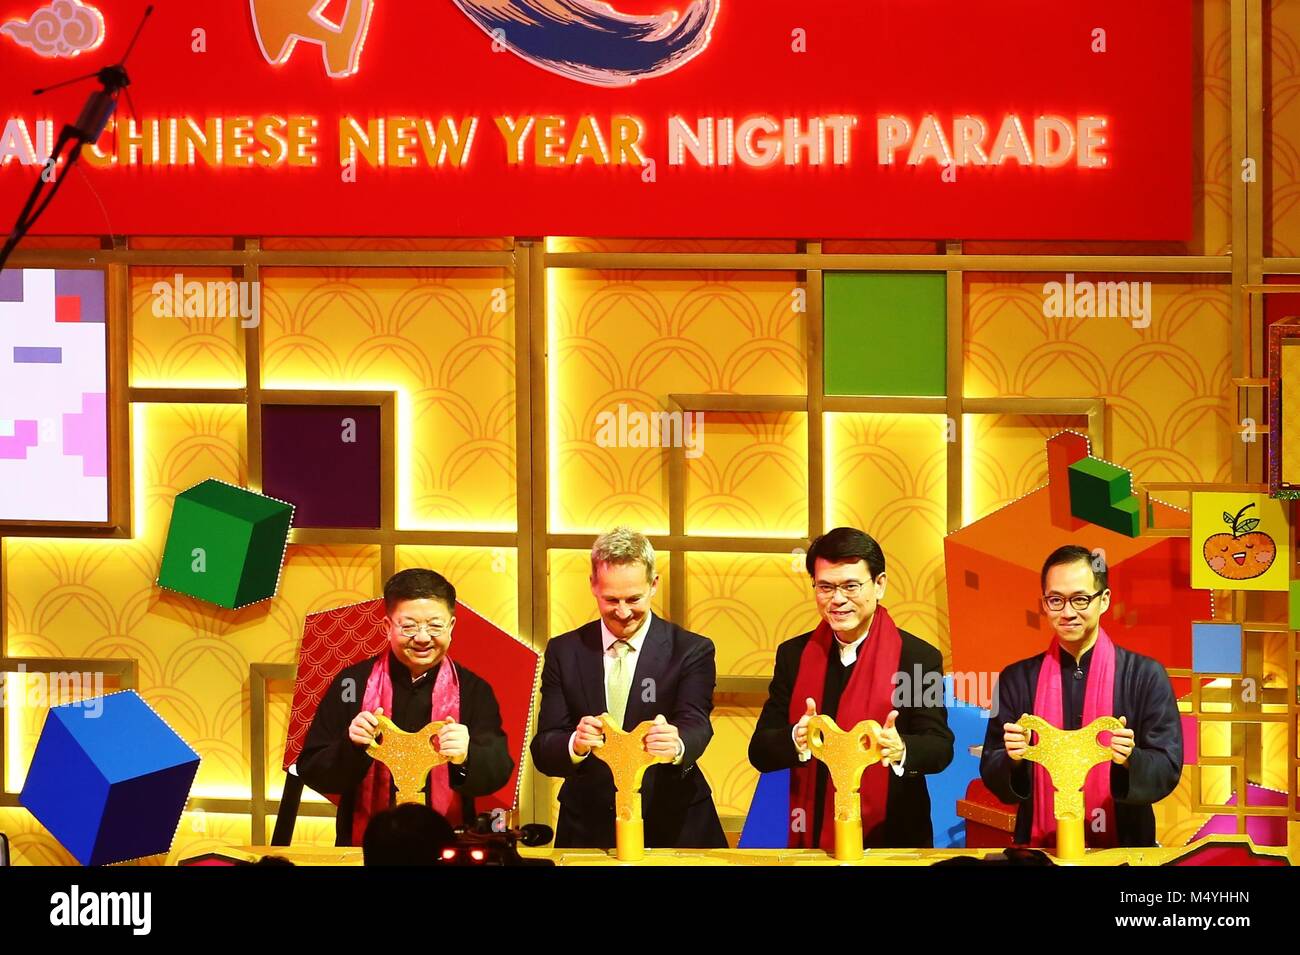 Hong Kong, Hong Kong - February 16, 2018. The annual Chinese New Year Night Parade 2018 takes place in the Tsim Sha Tsui area of Hong Kong. (L-R): the Executive Director of the HK Tourism Board Mr. Anthony Lau; the Chief Executive  Officer of Cathay Pacific Mr.Rupert Hogg; the Secretary for Commerce and Economic Development Mr.  Edward Yau; and the Chairman of Product and Event Committee of the HK Tourism Board, Mr. Paulo Pong,  seend during the opening ceremony of the Chinese New Year Parade. Stock Photo